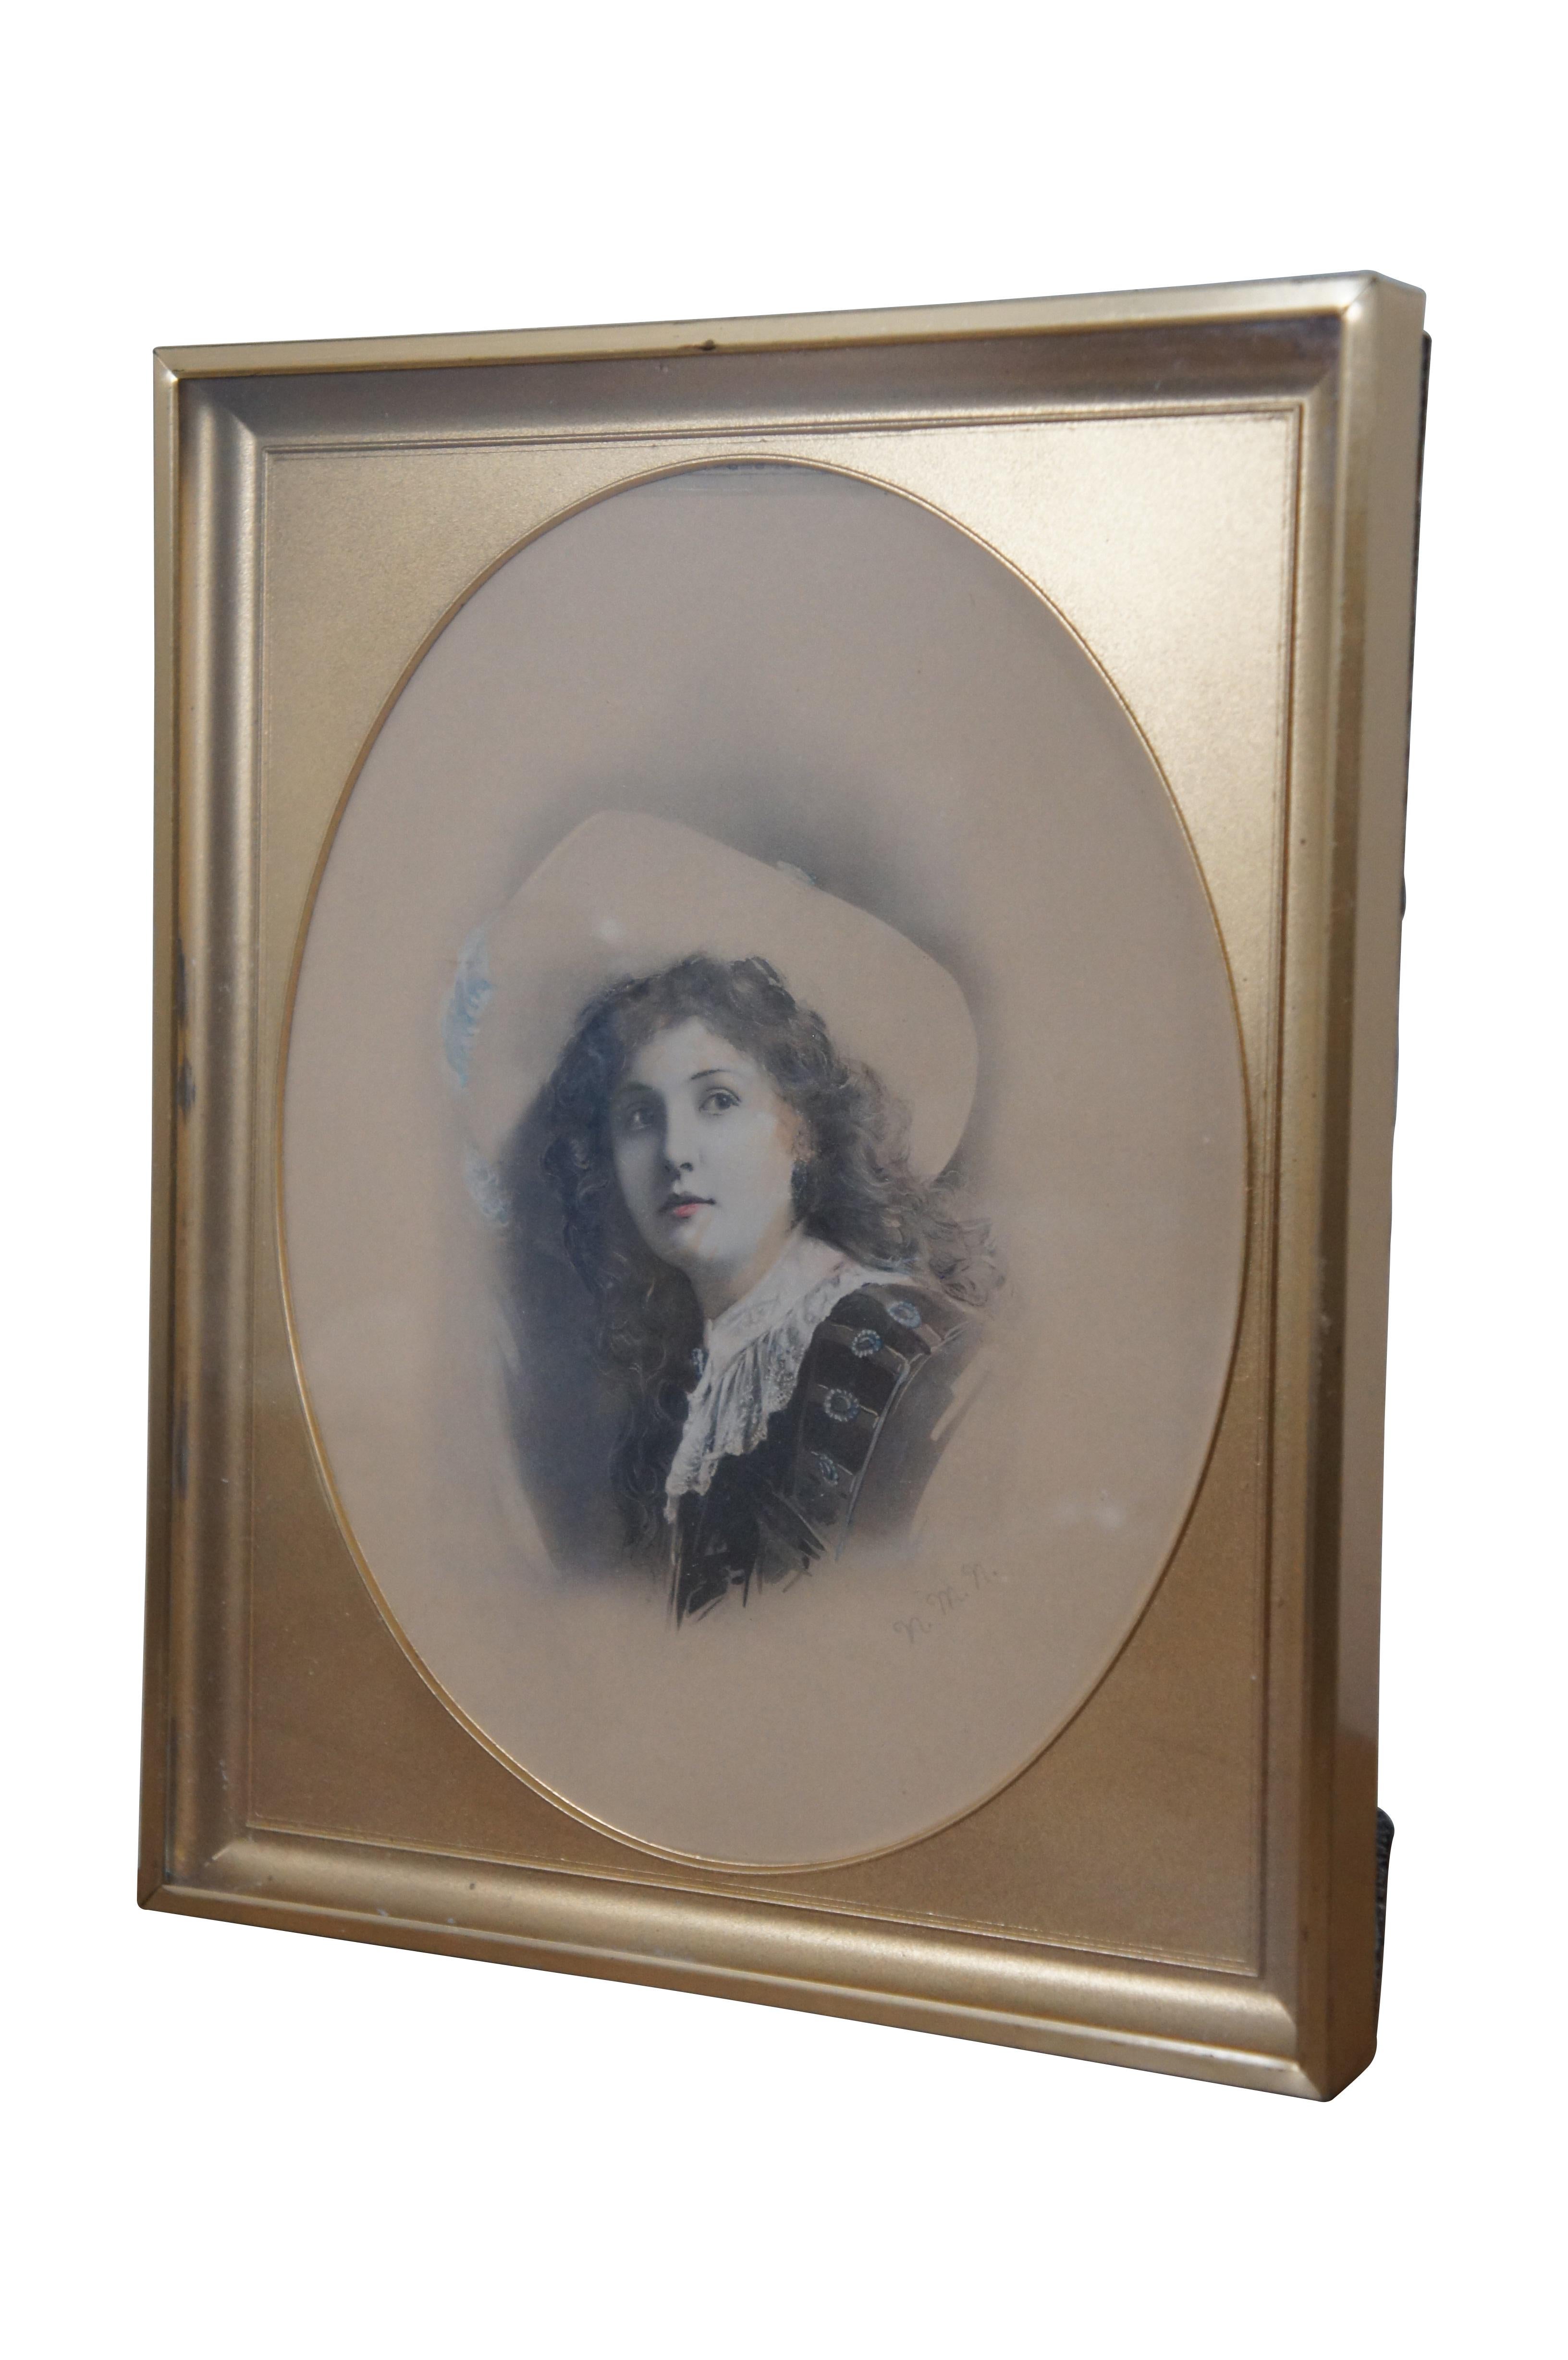 Antique hand colored oval portrait print of a young girl in a large hat and wide lace collar. Pencil signed N.M.N. Framed in a beveled, gilded frame and mat.

Dimensions:
9.125